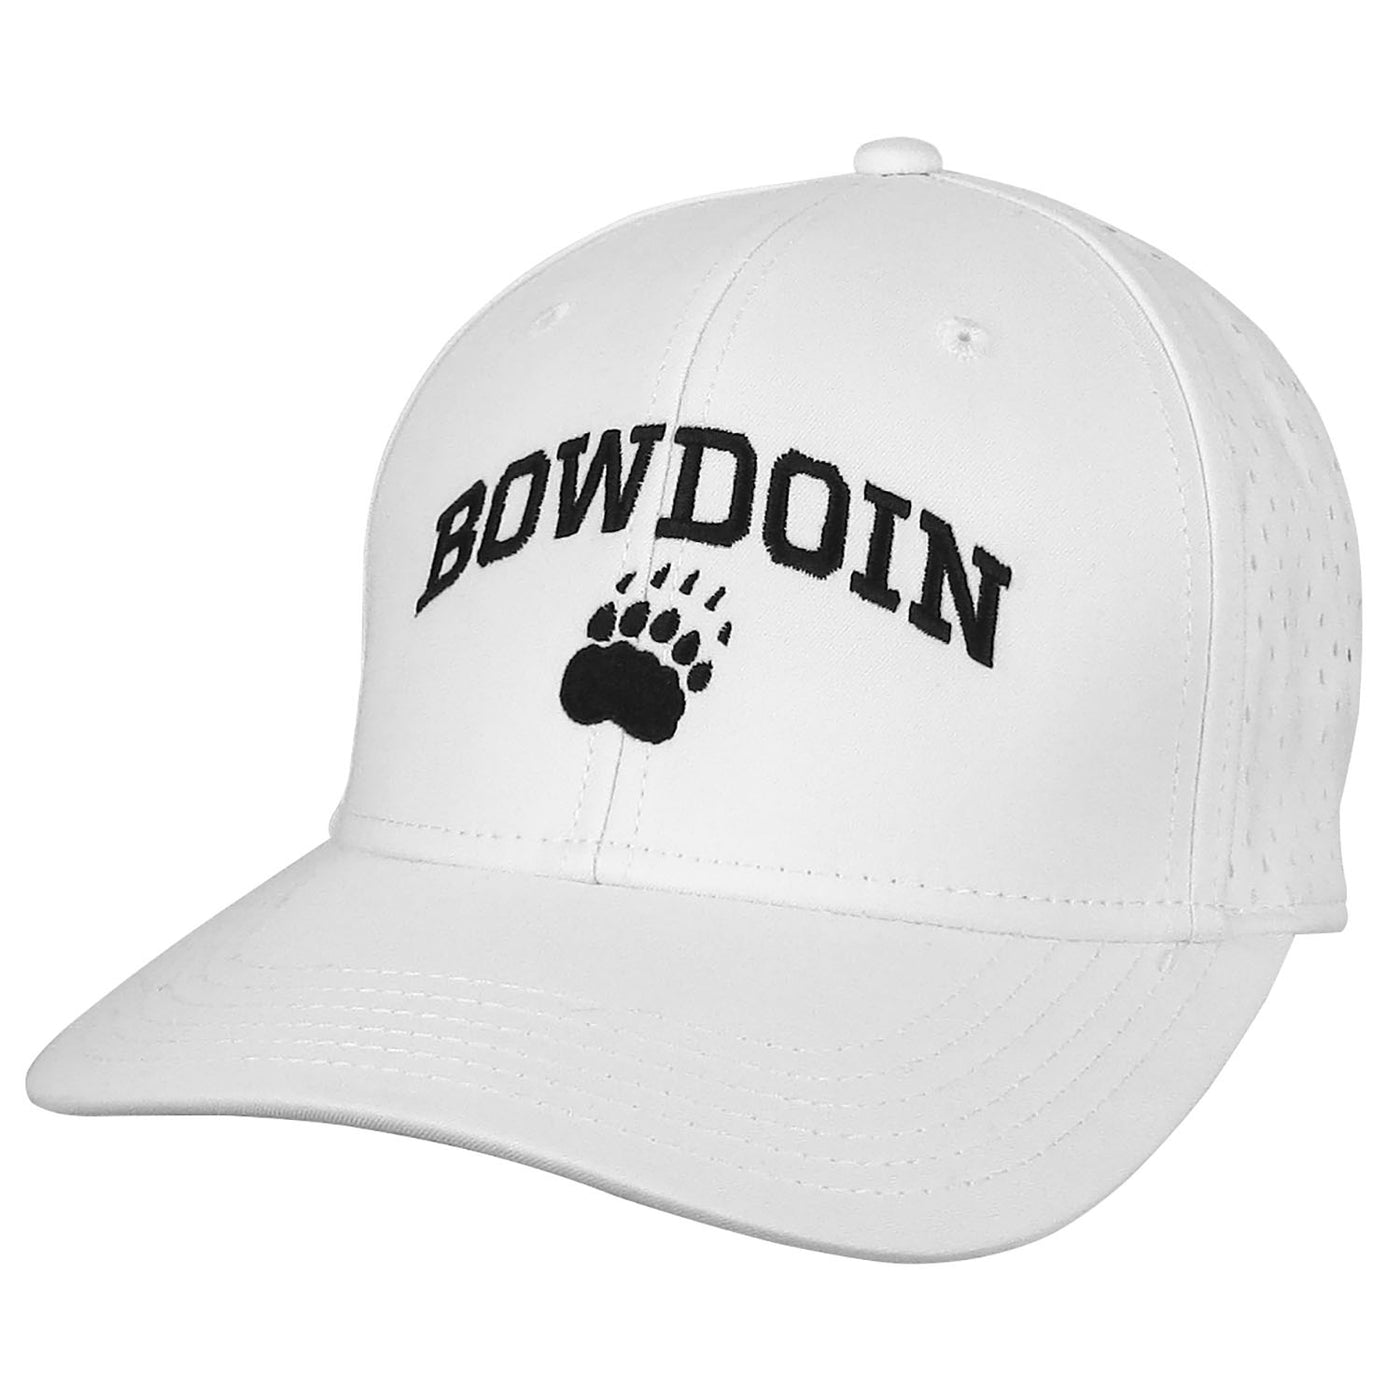 Reclaim Mid-Pro Hat with – Legacy Paw from Bowdoin Store Bowdoin and The